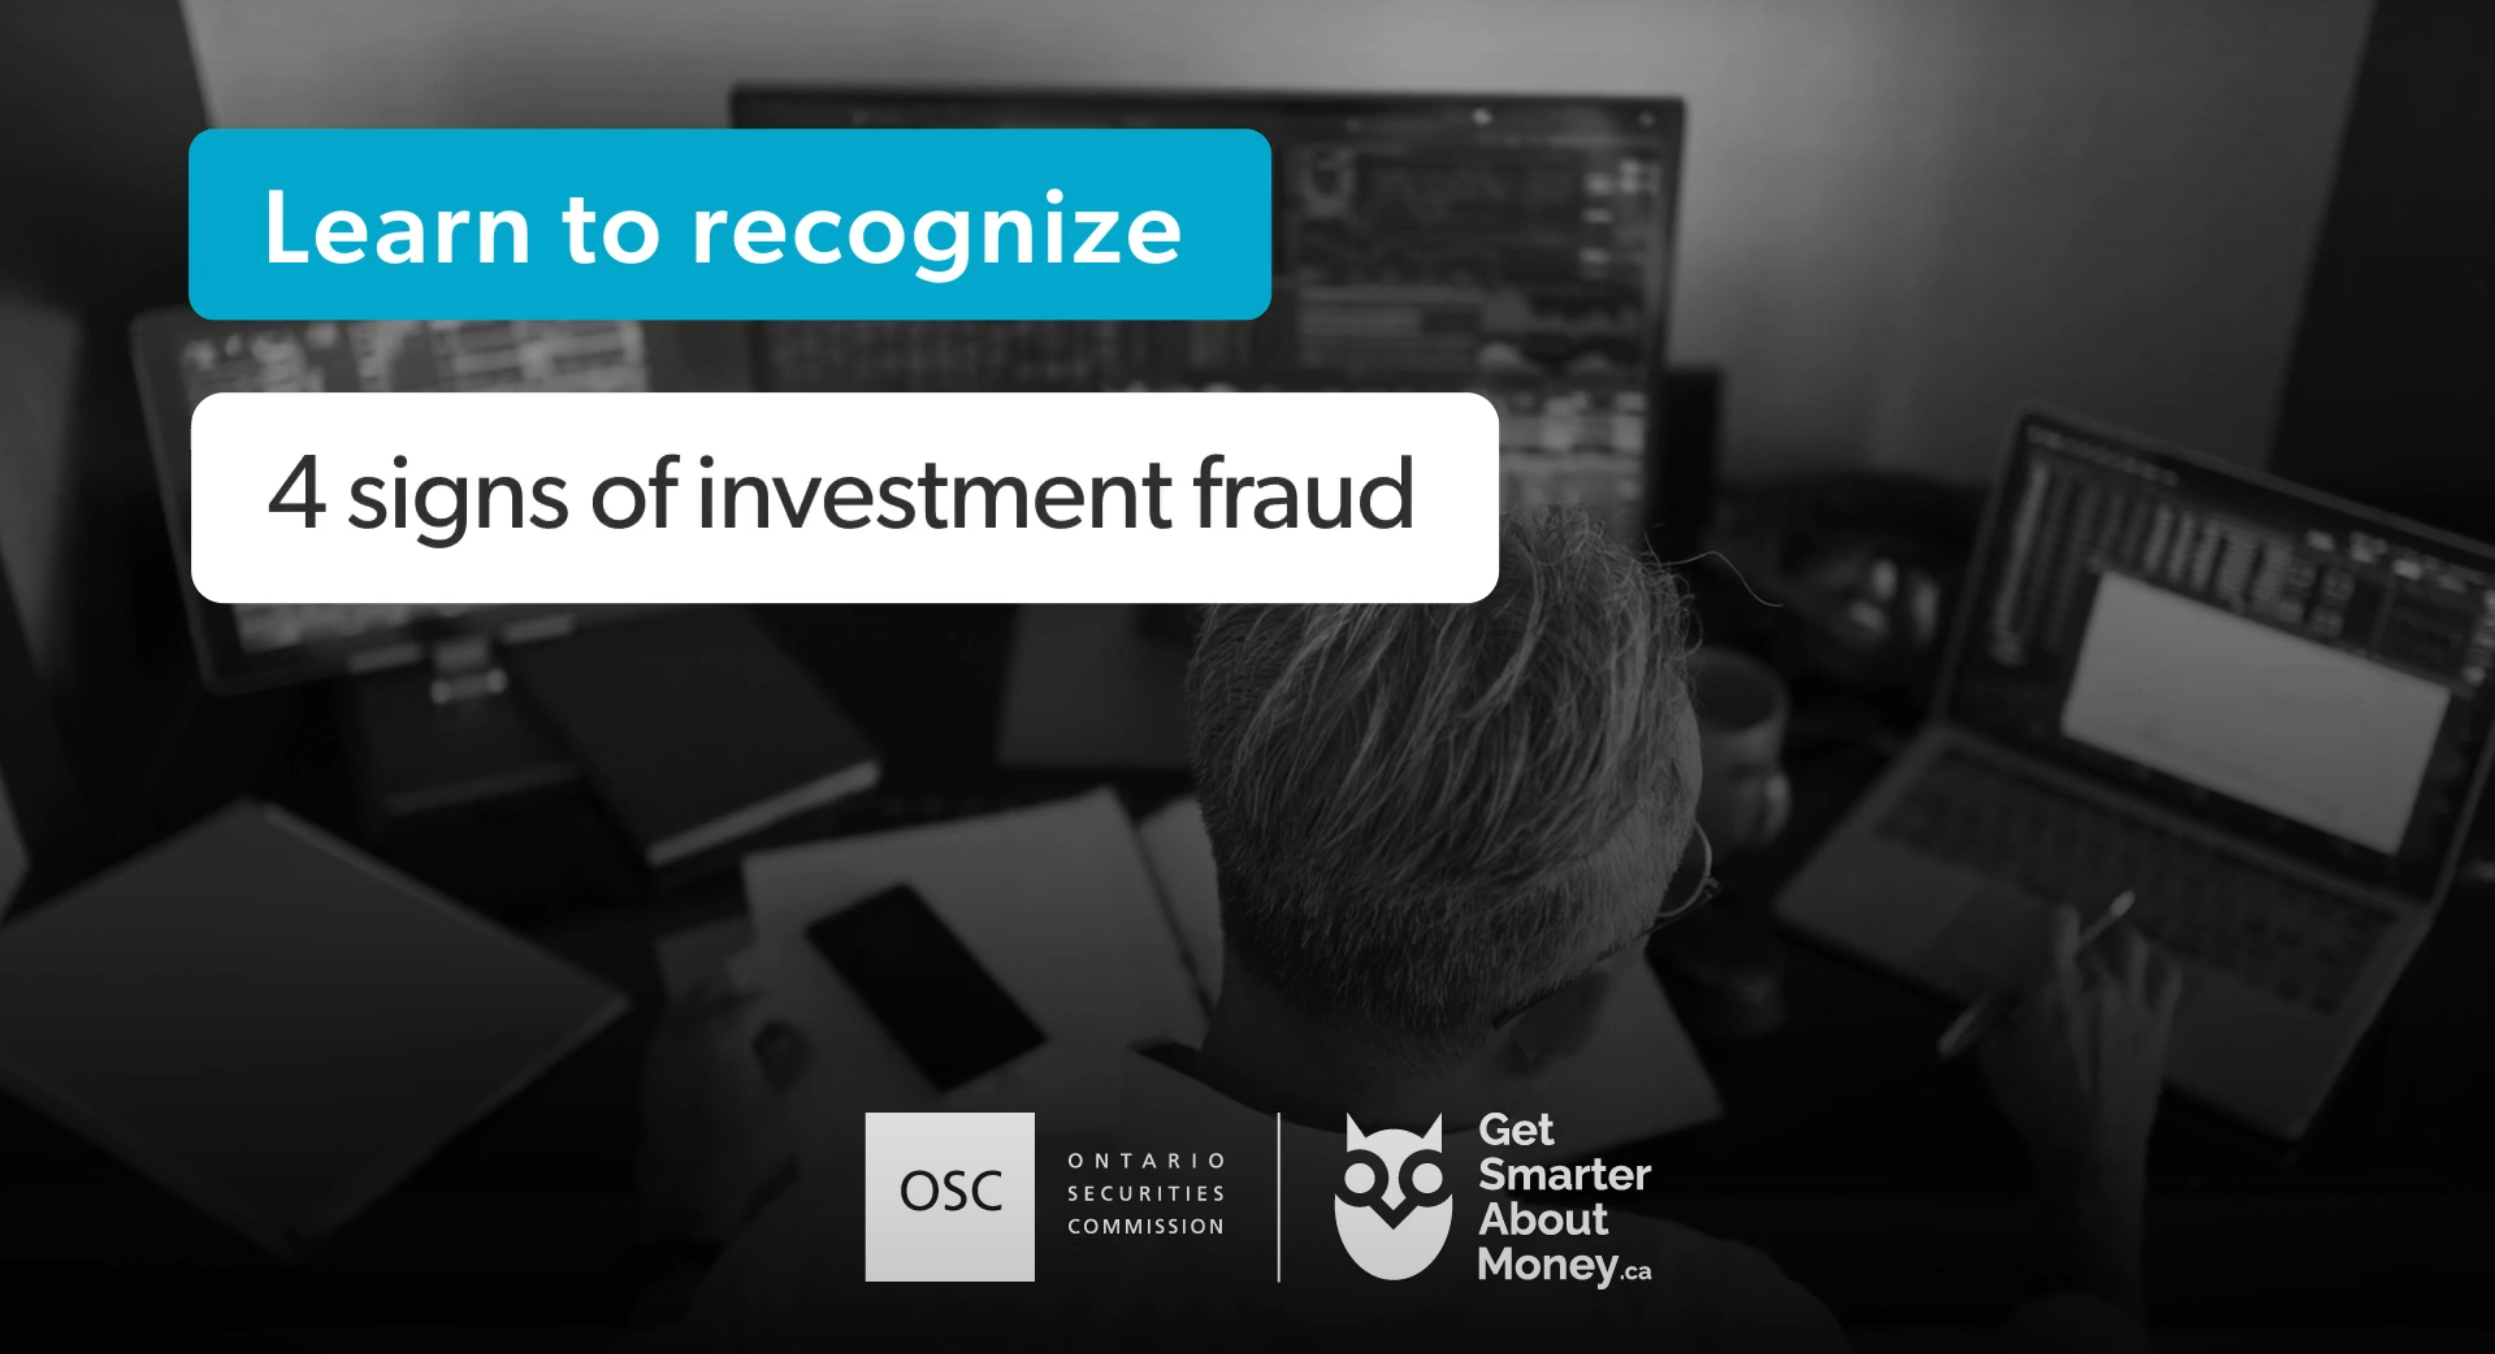 4 signs of investment fraud